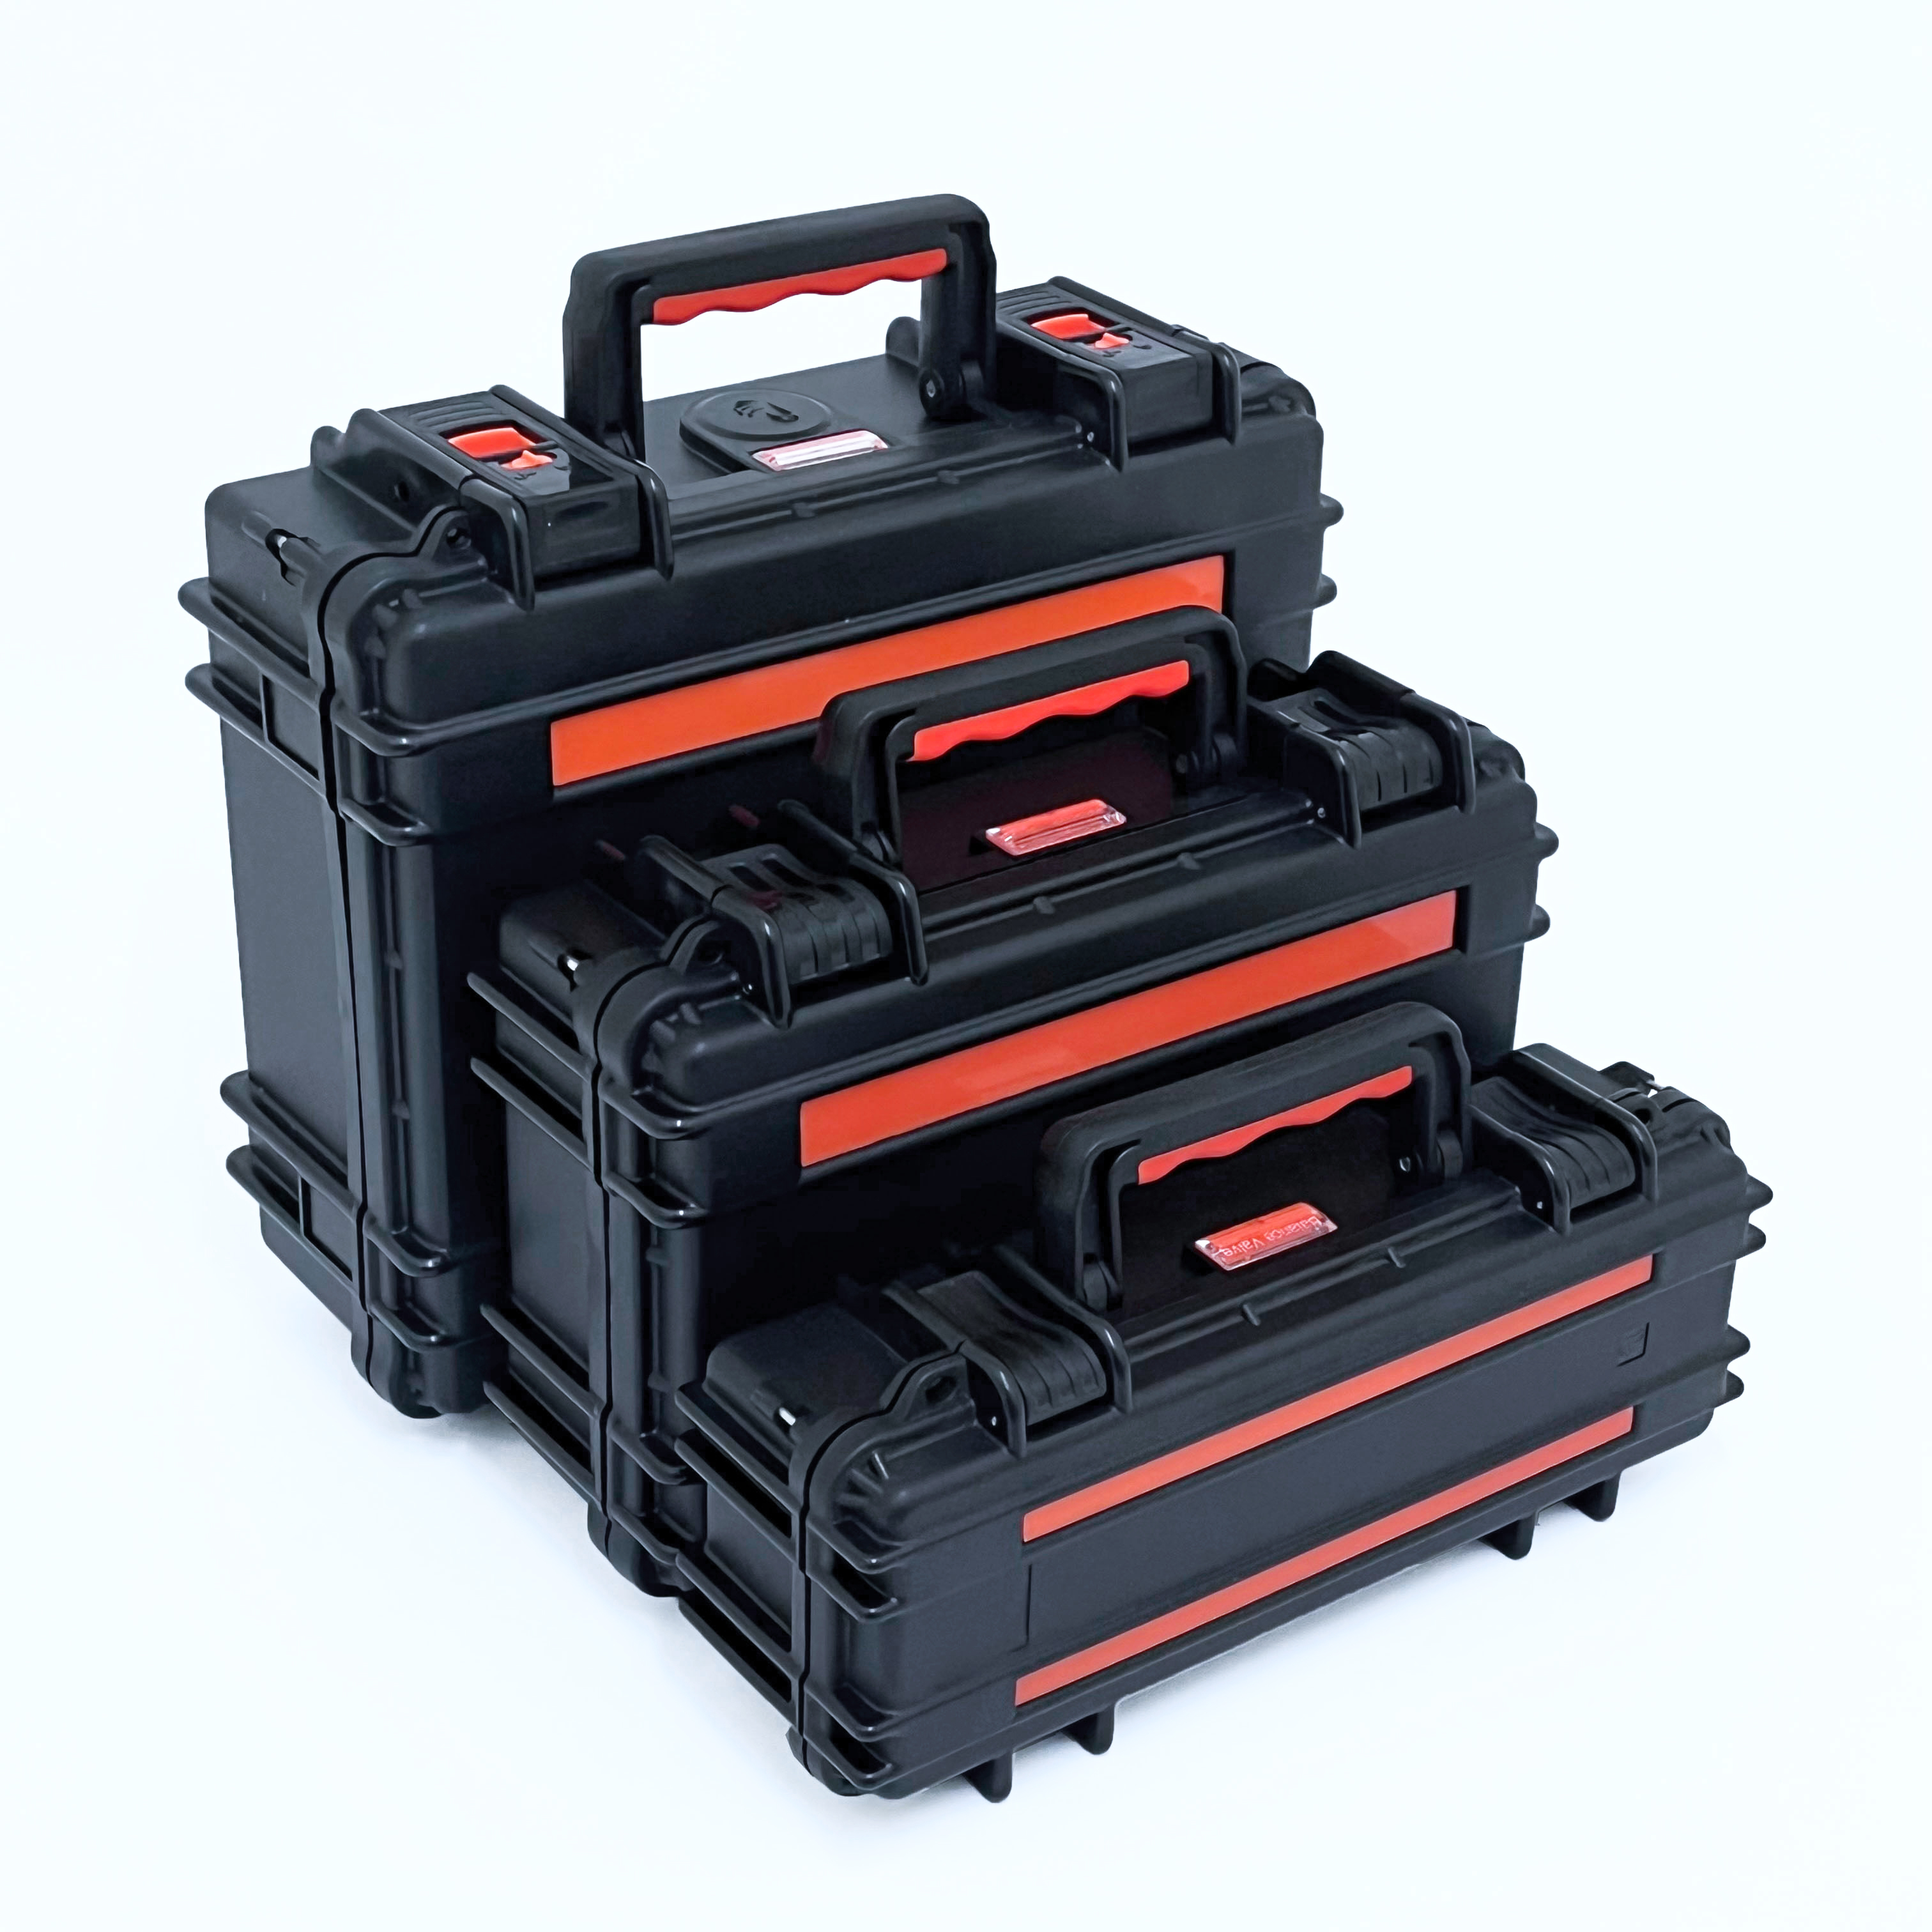 Manufacturer Outdoor Camera Protective Case Abs Plastic Case Carrying Plastic Hard Tool Case